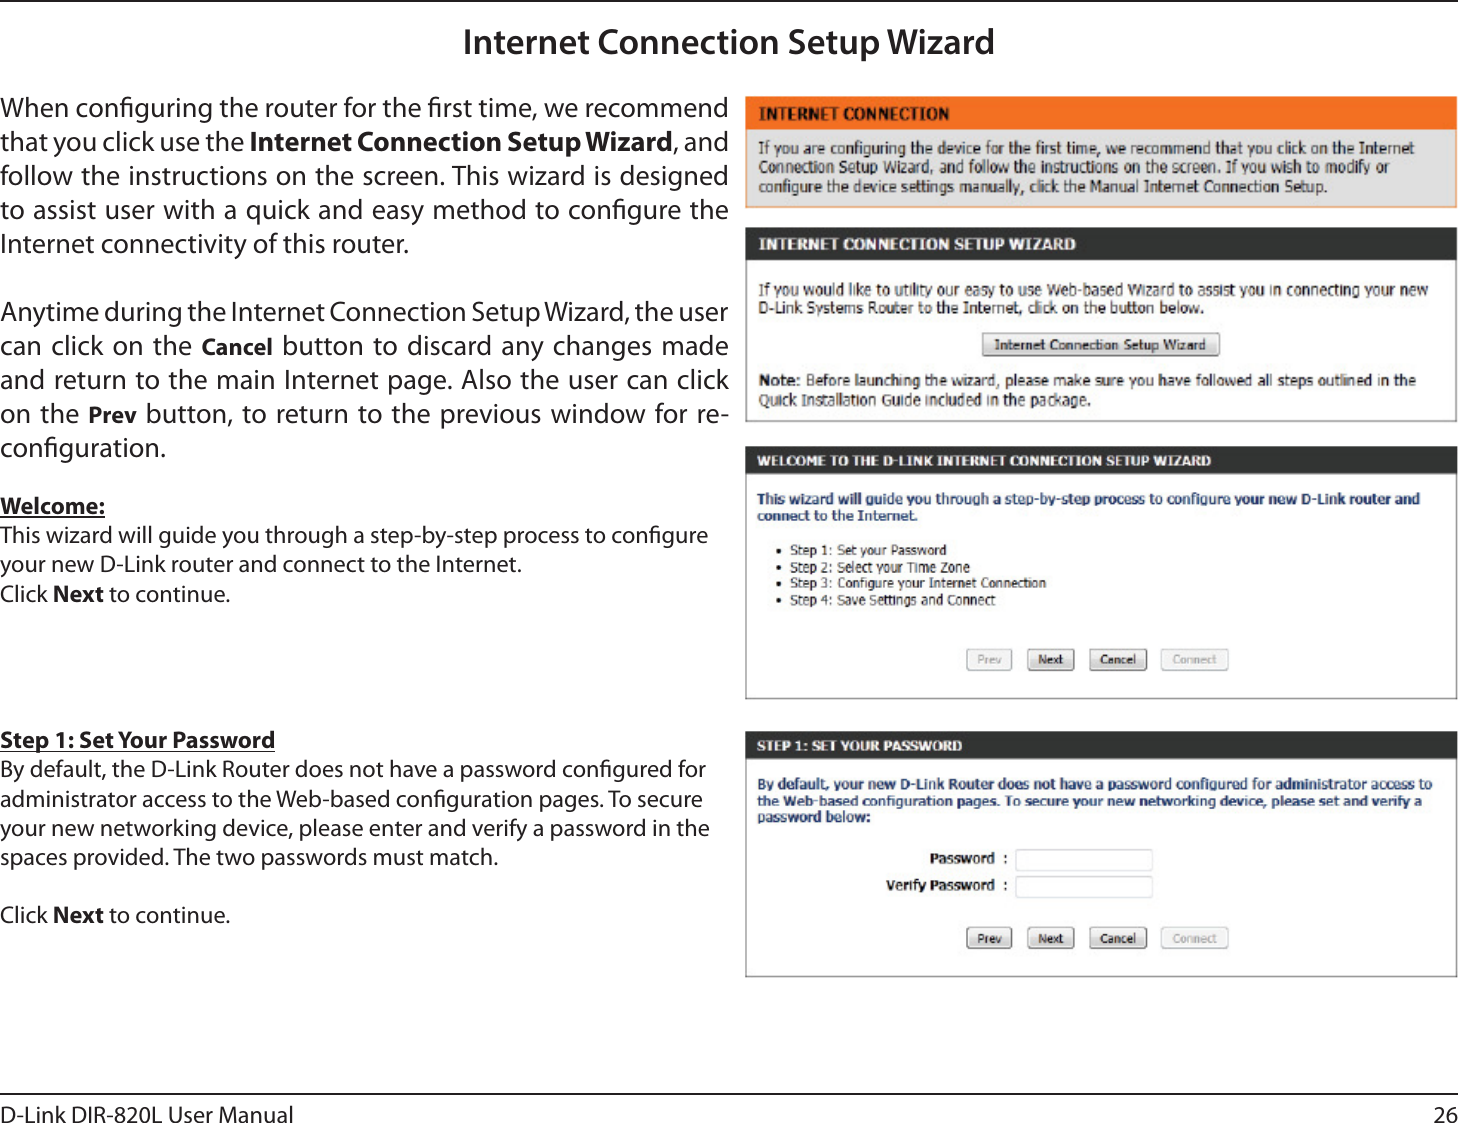 26D-Link DIR-820L User ManualInternet Connection Setup WizardWhen conguring the router for the rst time, we recommend that you click use the Internet Connection Setup Wizard, and follow the instructions on the screen. This wizard is designed to assist user with a quick and easy method to congure the Internet connectivity of this router.Anytime during the Internet Connection Setup Wizard, the user can click on the Cancel button to discard any changes made and return to the main Internet page. Also the user can click on the Prev button, to return to the previous window for re-conguration.Welcome:This wizard will guide you through a step-by-step process to congure your new D-Link router and connect to the Internet. Click Next to continue.Step 1: Set Your PasswordBy default, the D-Link Router does not have a password congured for administrator access to the Web-based conguration pages. To secure your new networking device, please enter and verify a password in the spaces provided. The two passwords must match.Click Next to continue.